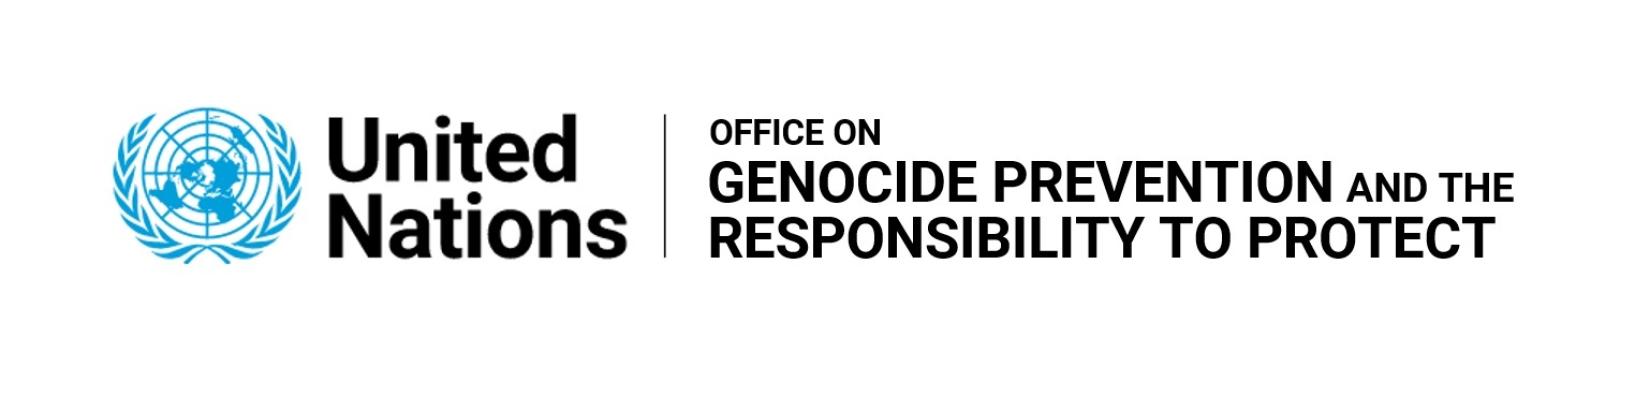 Office-on-Genocide-Prevention